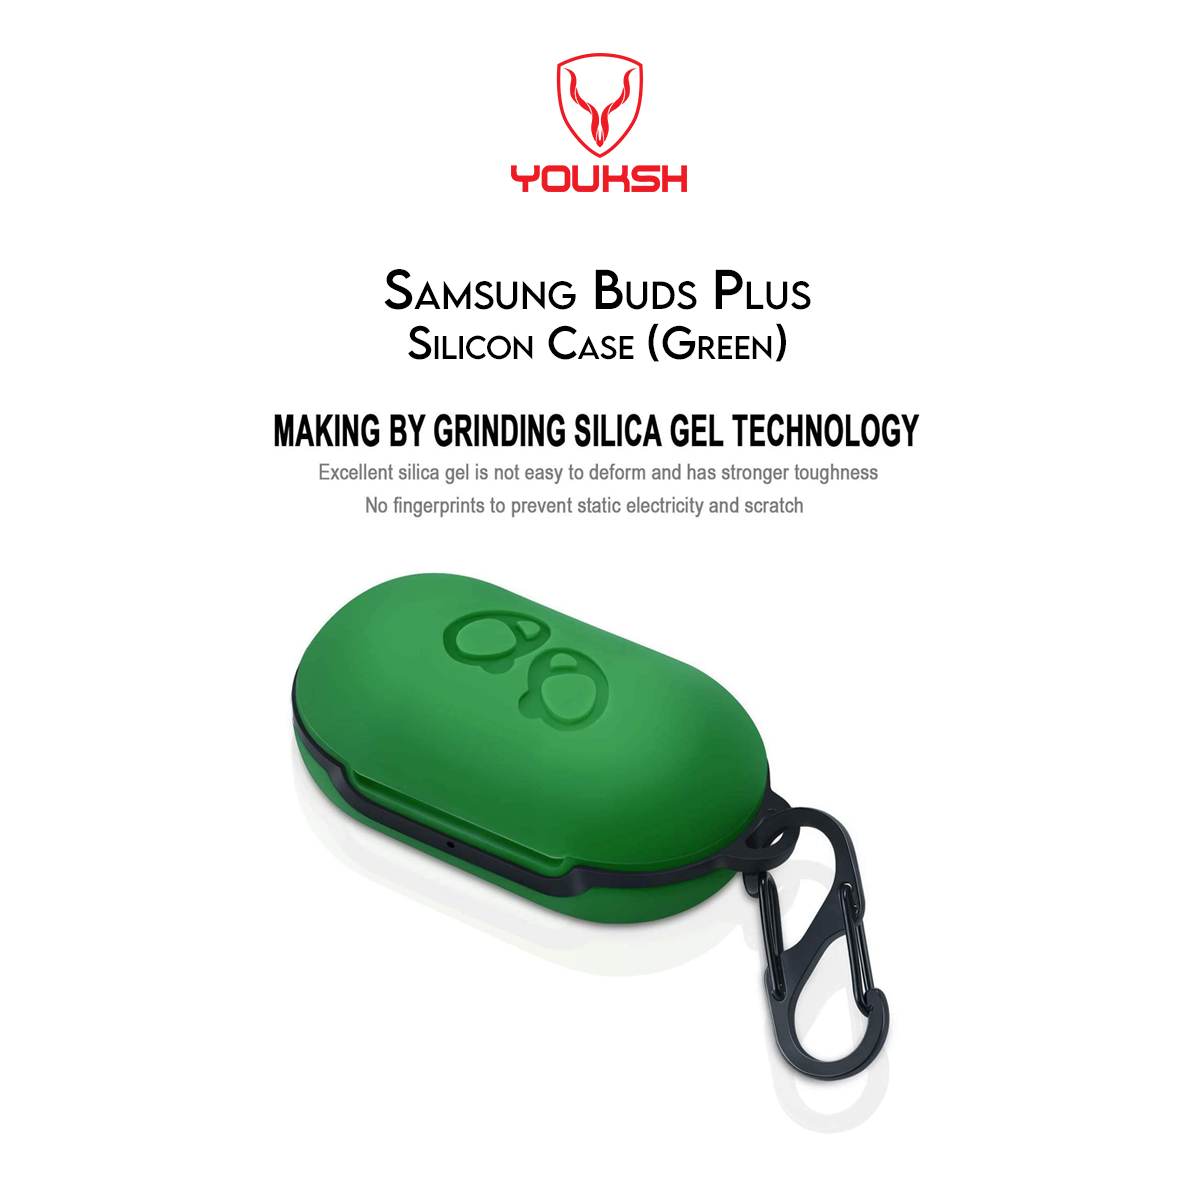 Samsung Galaxy Buds Plus - Youksh Silicone case - High Quailty Shock Proof Case Only.